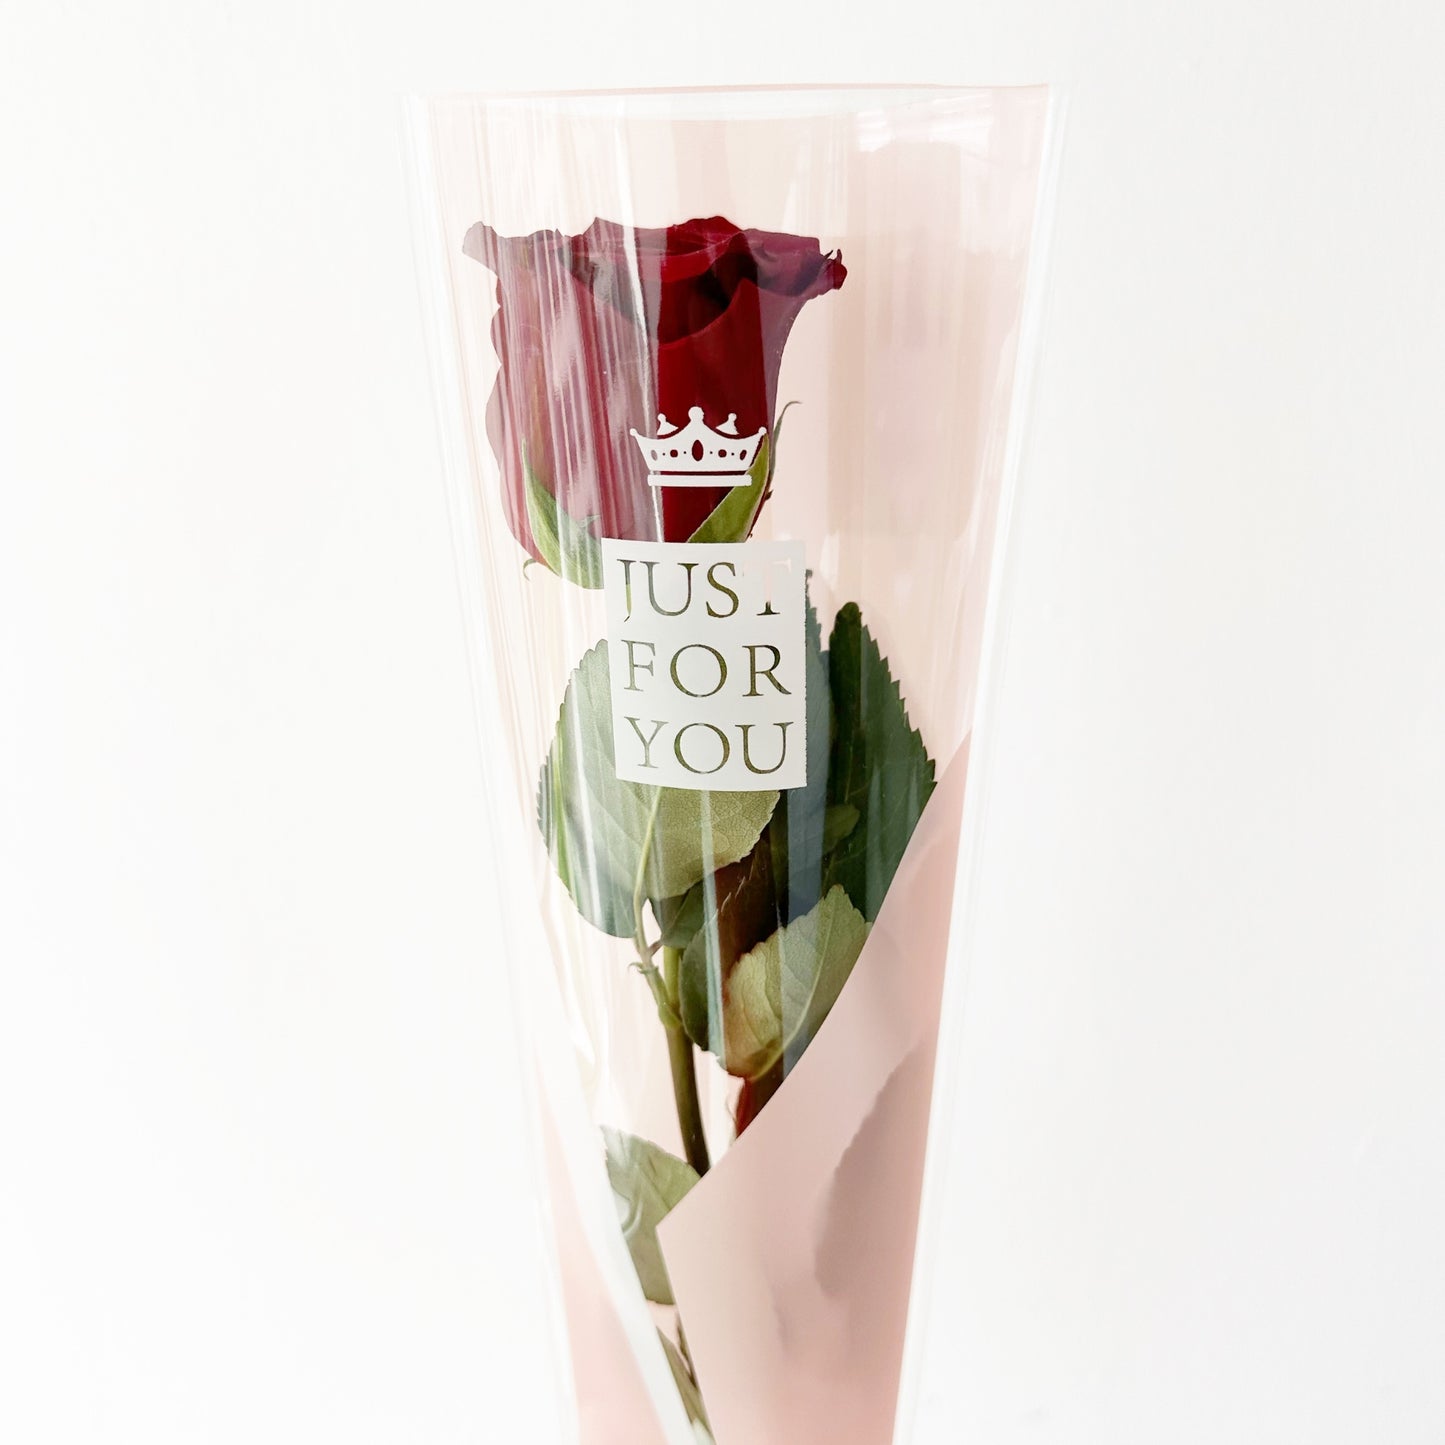 Happy 520! | Single Stalk Red Rose | *Only Available for 20May* From $9.90 Nett